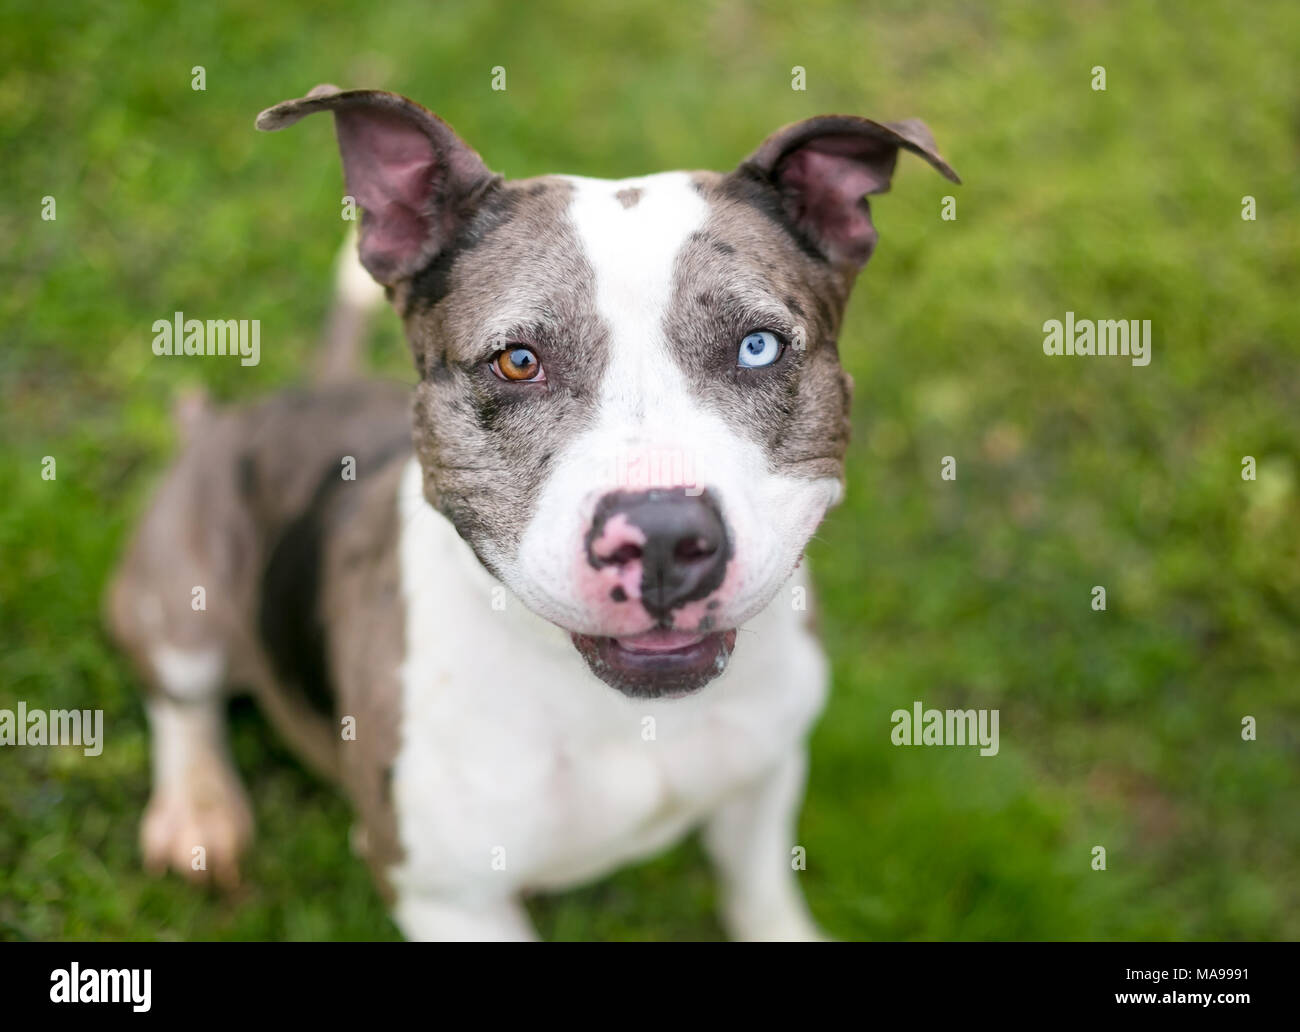 A Catahoula Leopard Dog mixed breed dog with heterochromia, one blue eye and one brown eye Stock Photo